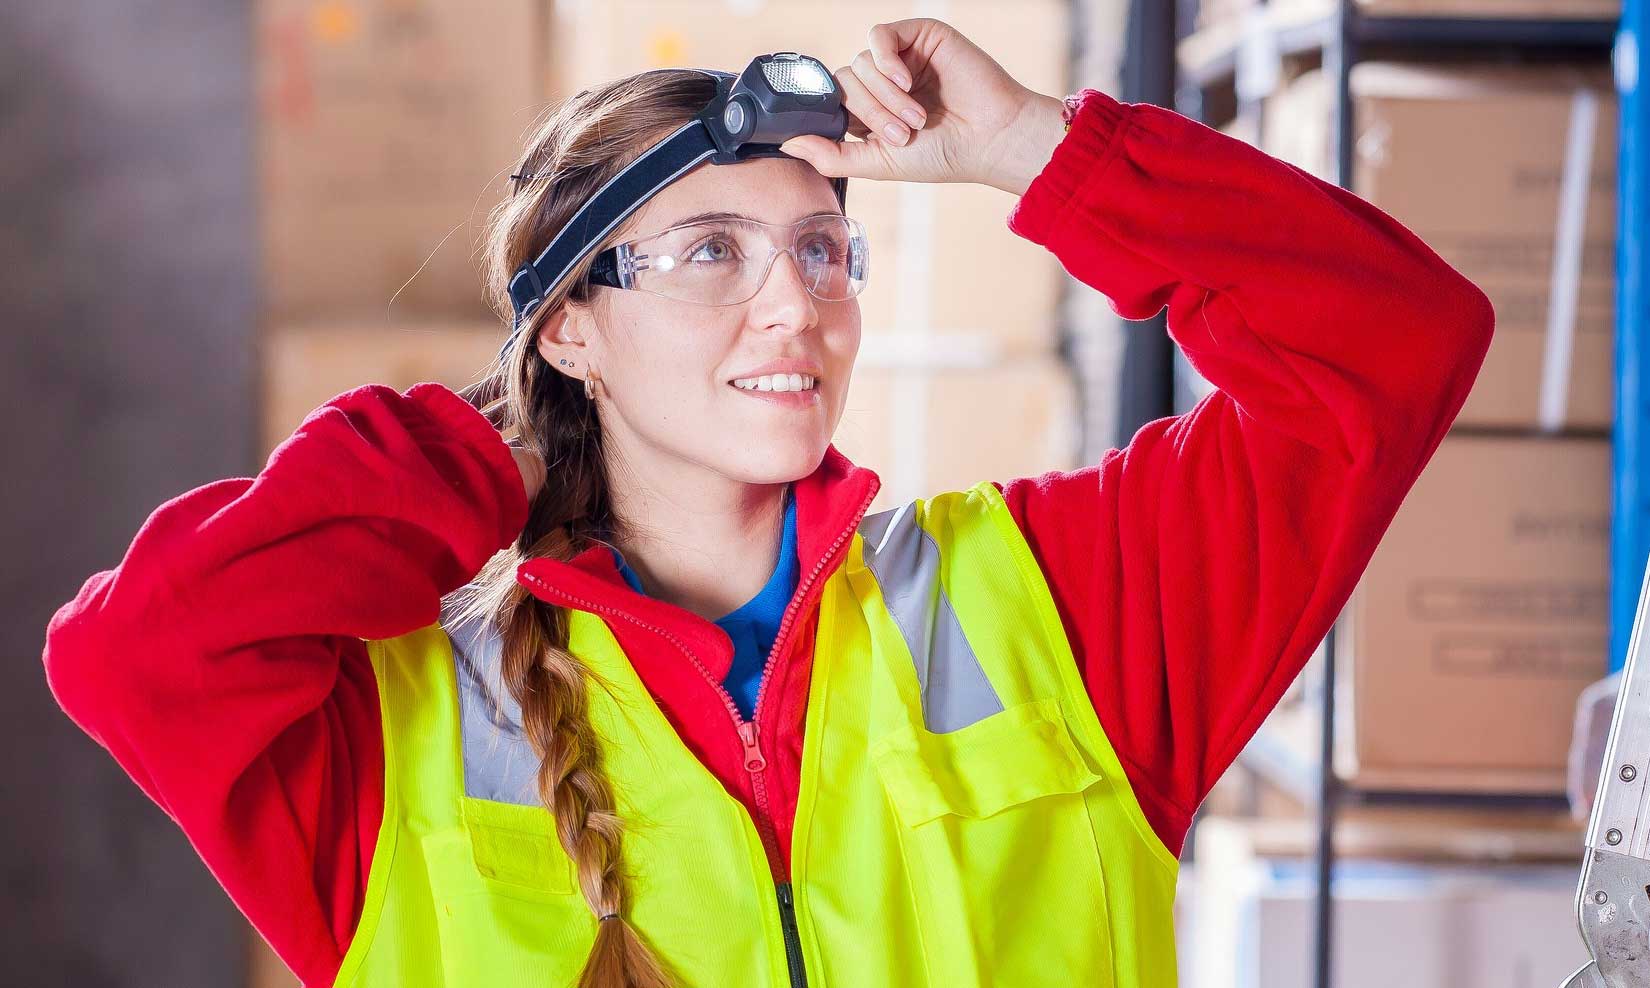 Leak detection and leak search with safety goggles and other PPE equipment